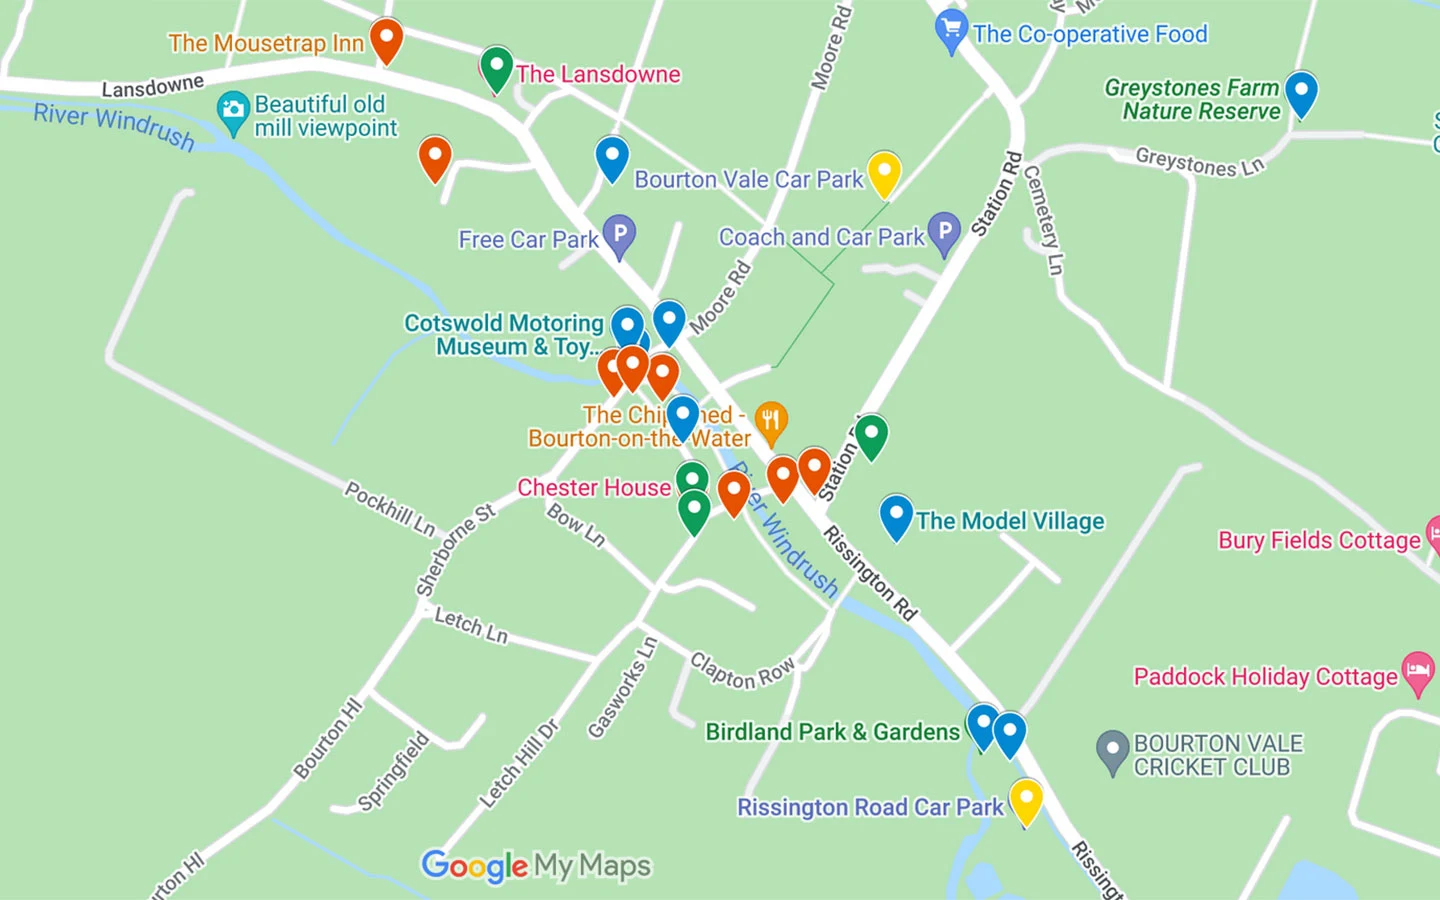 Map of things to do in Bourton-on-the-Water